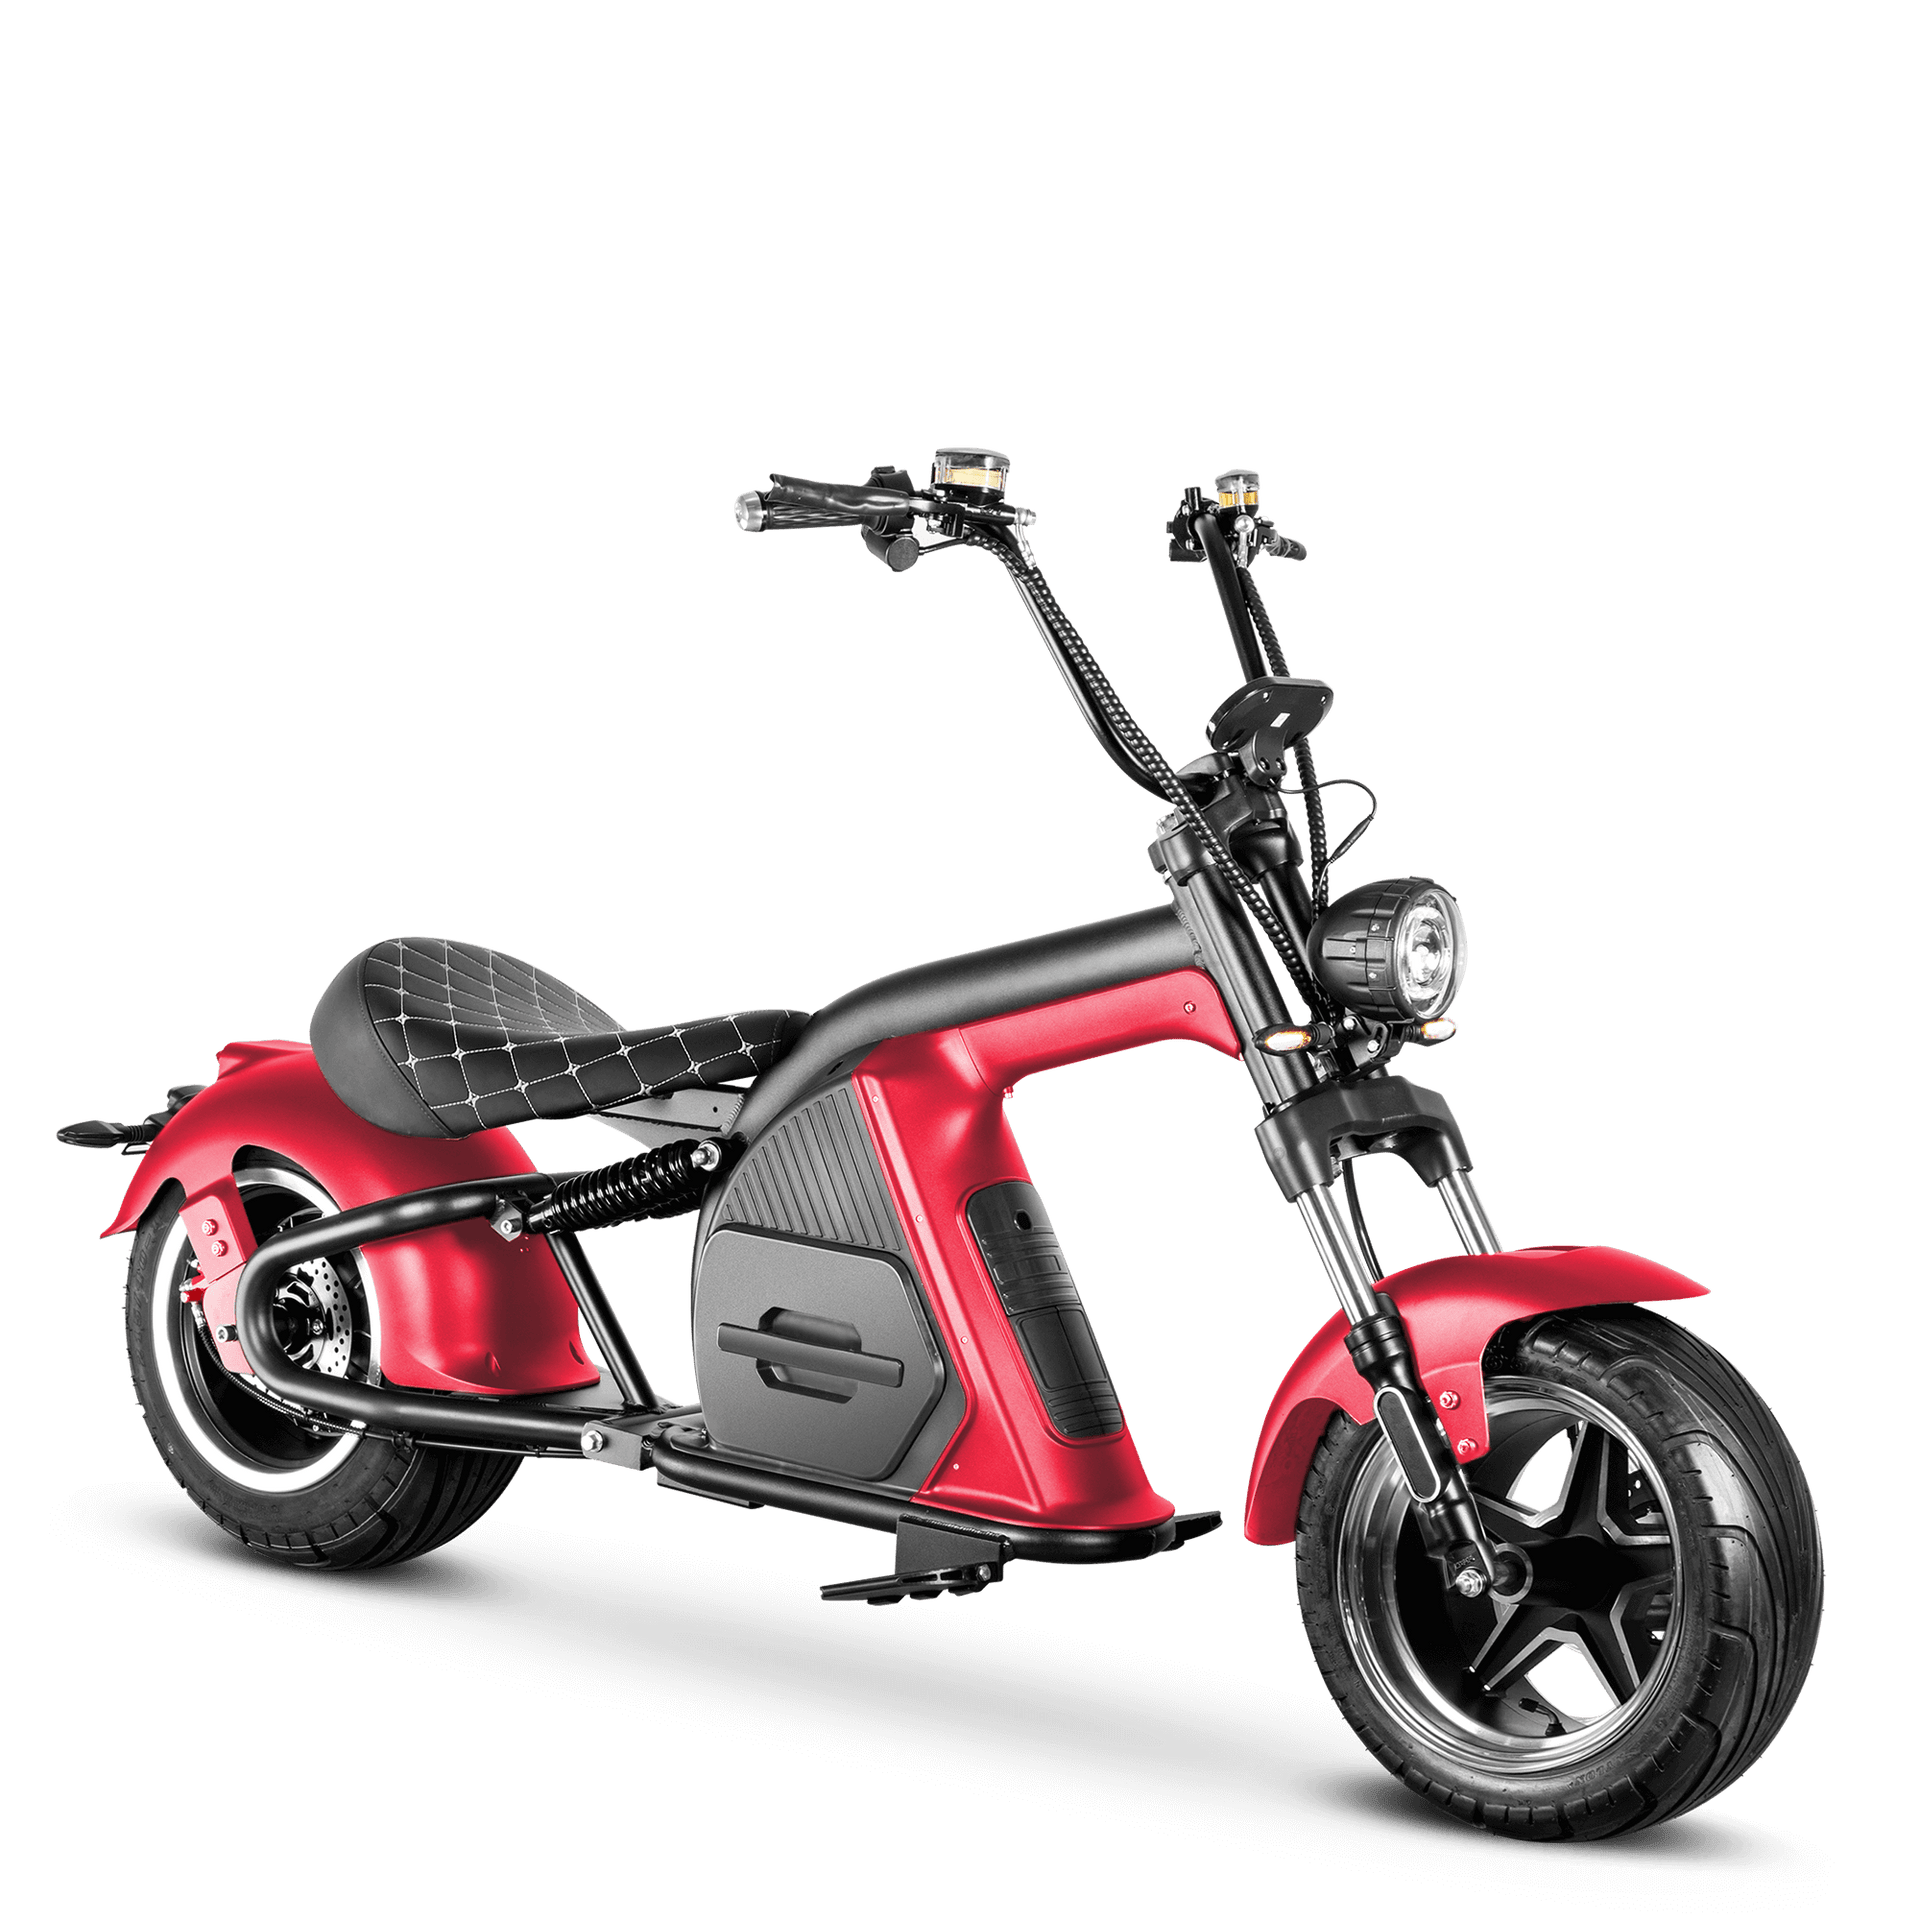 2000W Tire Scooter Motorcycle - Eahora Emoto Red